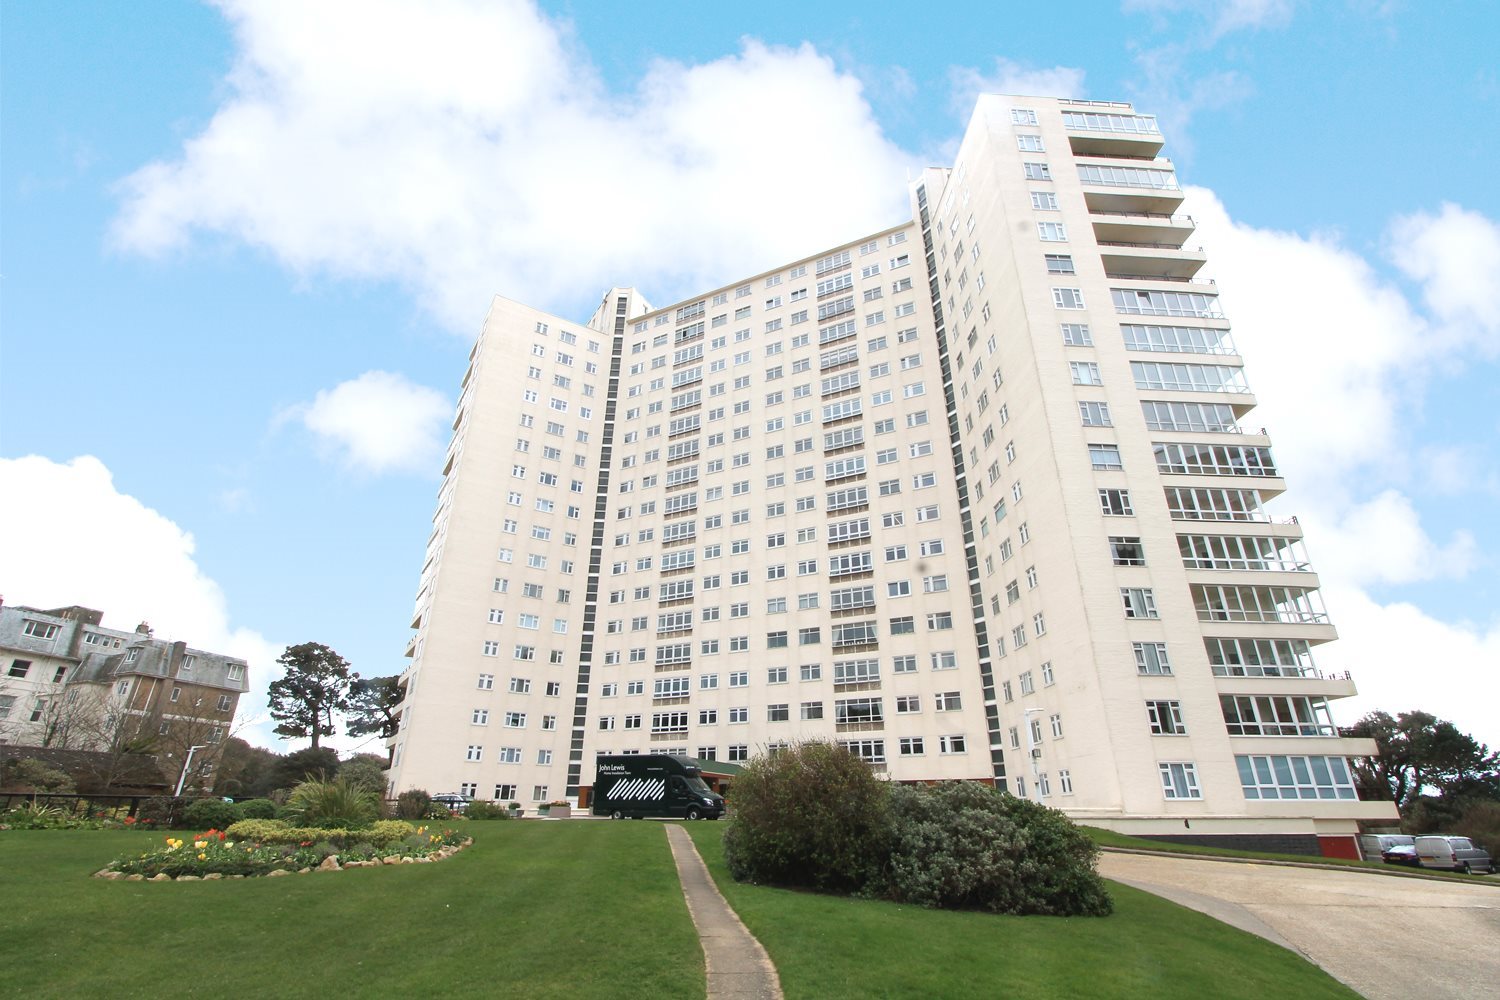 Christopher Shaw are delighted to offer this desirable 14th floor one bedroom apartment in East Cliff within The Albany. The flat is currently let for £900.00 pcm but can be offered with vacant possessionAside from the obvious desirable location the stand out feature of the flat is the VIEW! as you are up in the higher floors within the building your views are simply breathtaking and can be enjoyed all year long in the warmth of your enclosed balcony, with views across to The Purbecks and along Bournemouth's award winning sandy beaches.The flat is neutral and bright, with a 4 piece en-suite bathroom, separate kitchen and a large leading into the enclosed balcony.  this one bedroom apartment would make a fantastic lock up and go holiday home and with the current stamp duty holiday it's a great time to buy. View Now to avoid disappointment